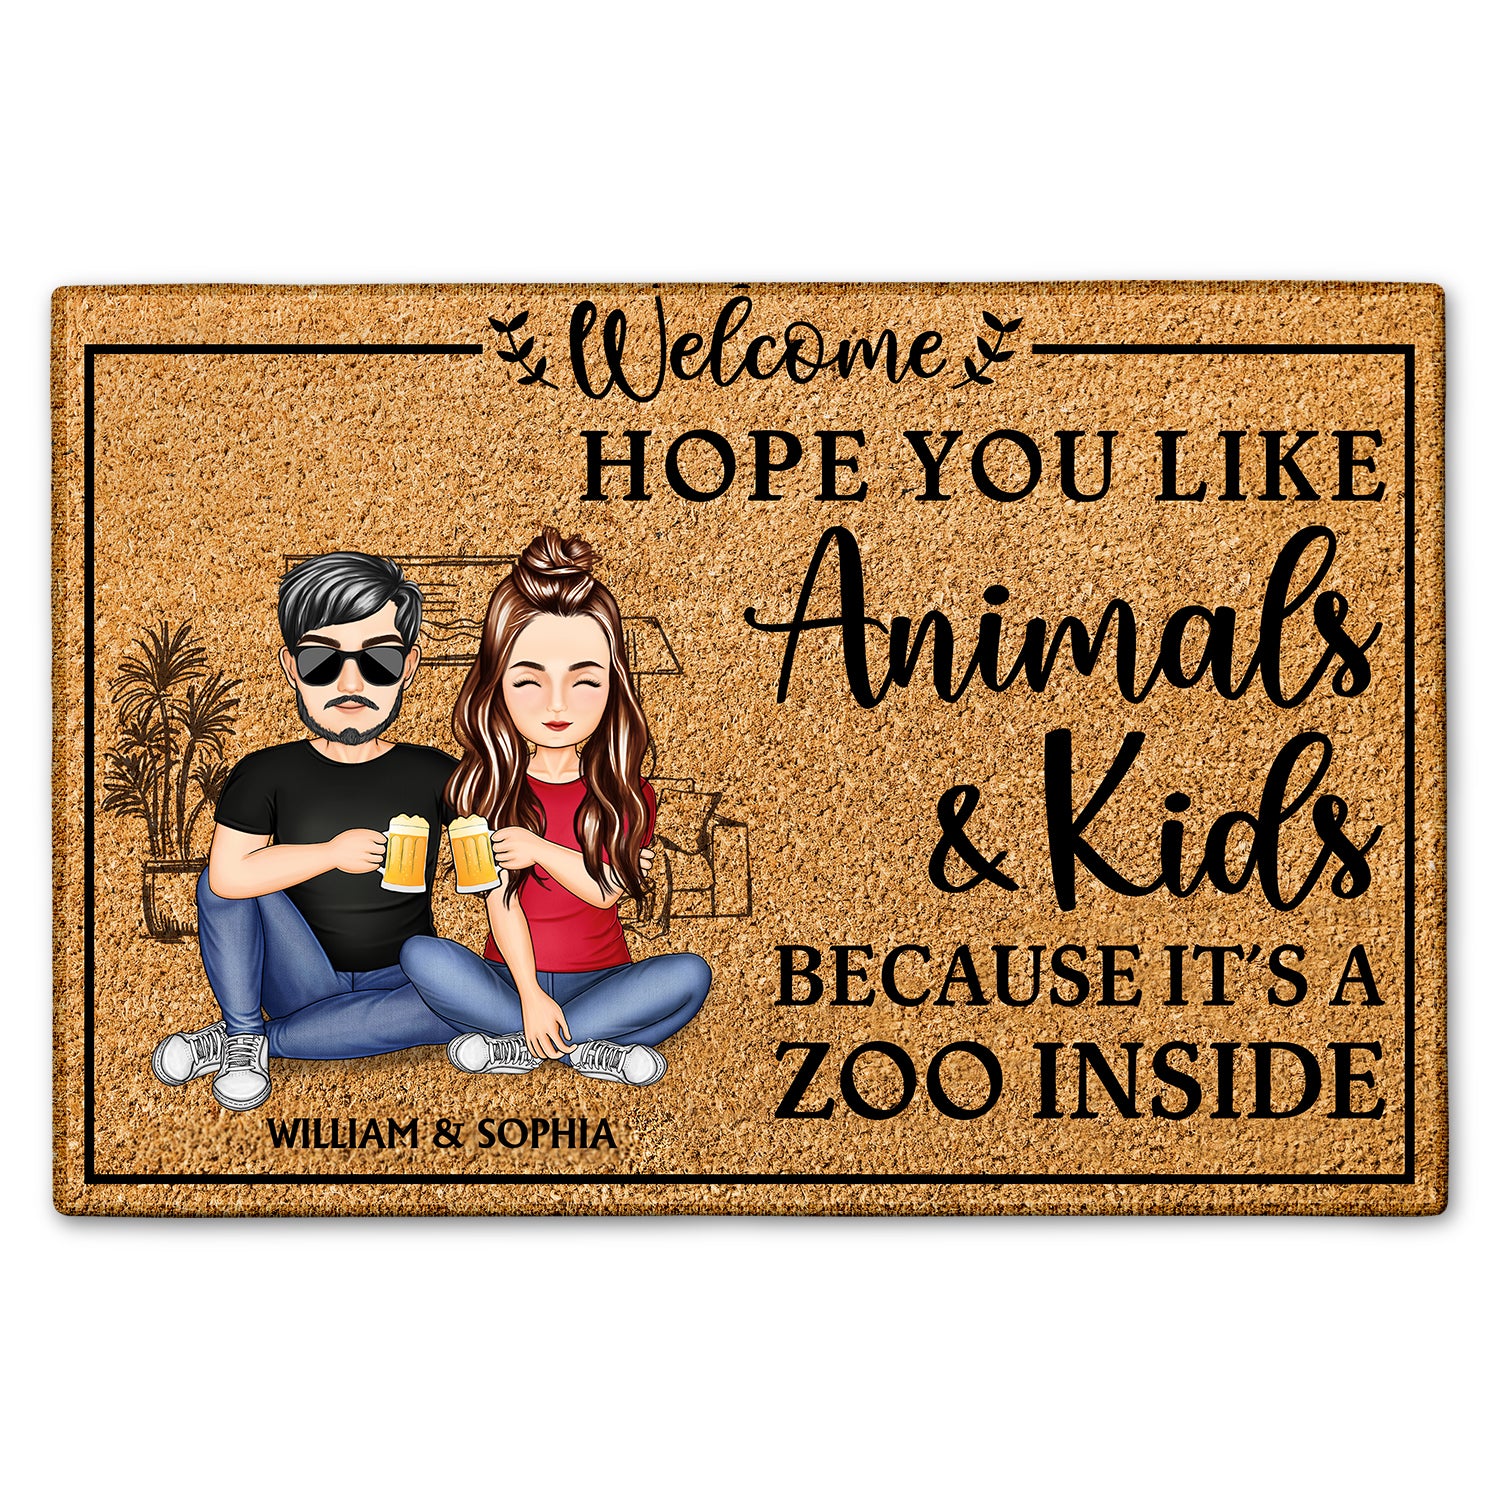 Hope You Like Animals And Kids - Anniversary, Birthday, Home Decor Gift For Spouse, Lover, Husband, Wife, Boyfriend, Girlfriend, Couple - Personalized Custom Doormat